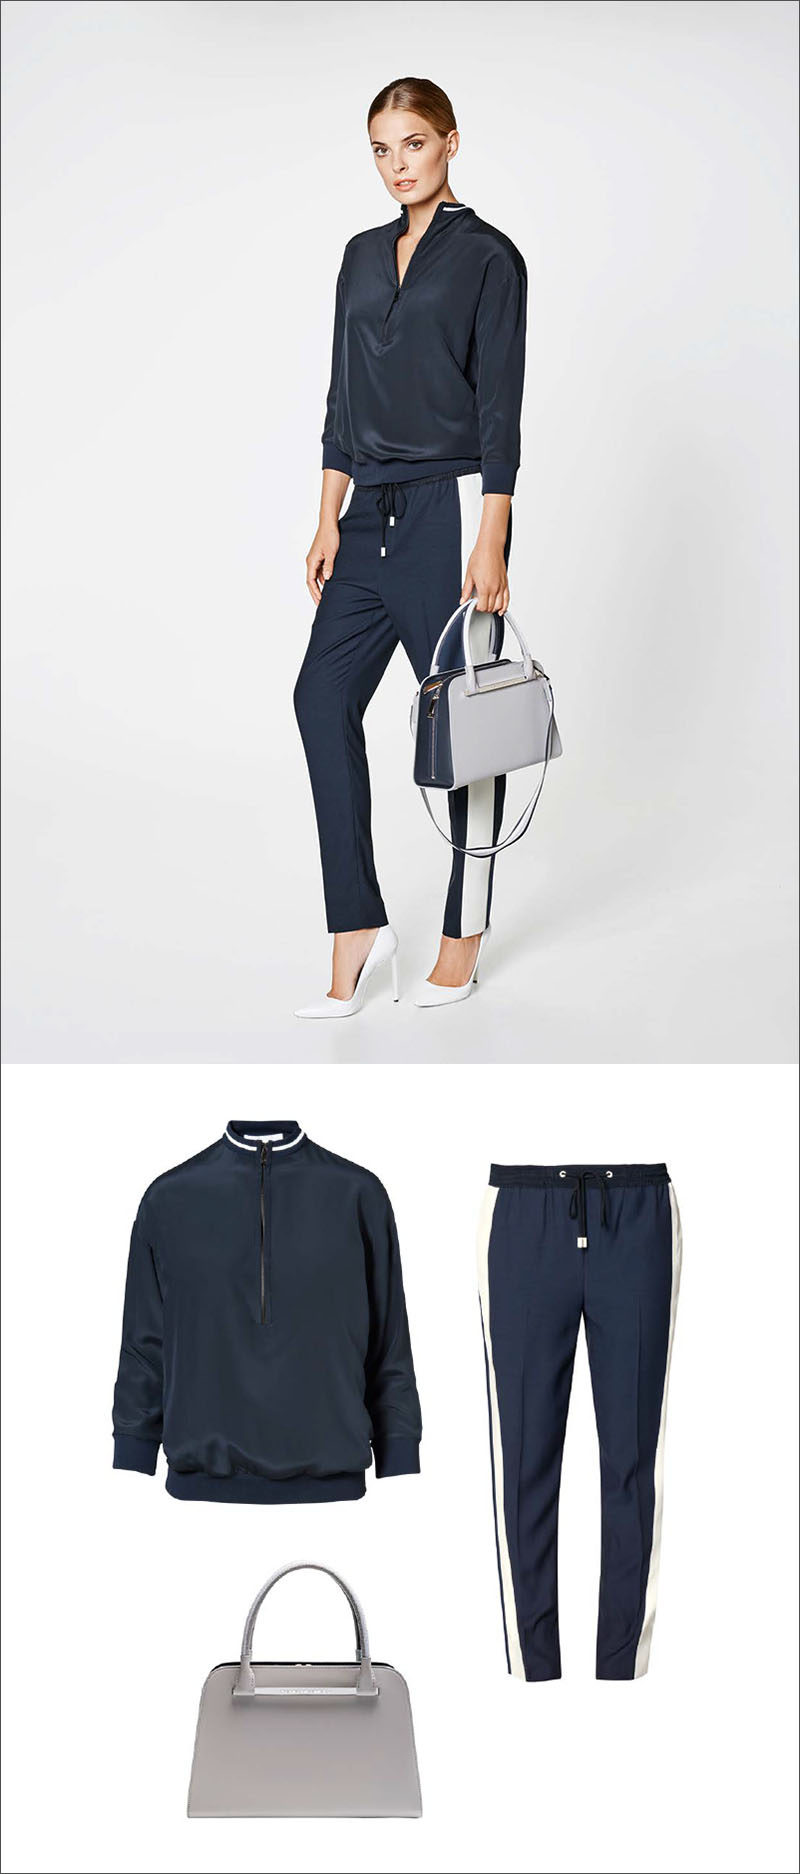 Women's Fashion Ideas - 12 Womens Outfits From Porsche Design's 2017 Spring/Summer Collection // This casual women's outfit features a navy blouse, a pair of navy and white pants, and a classic grey and navy purse.